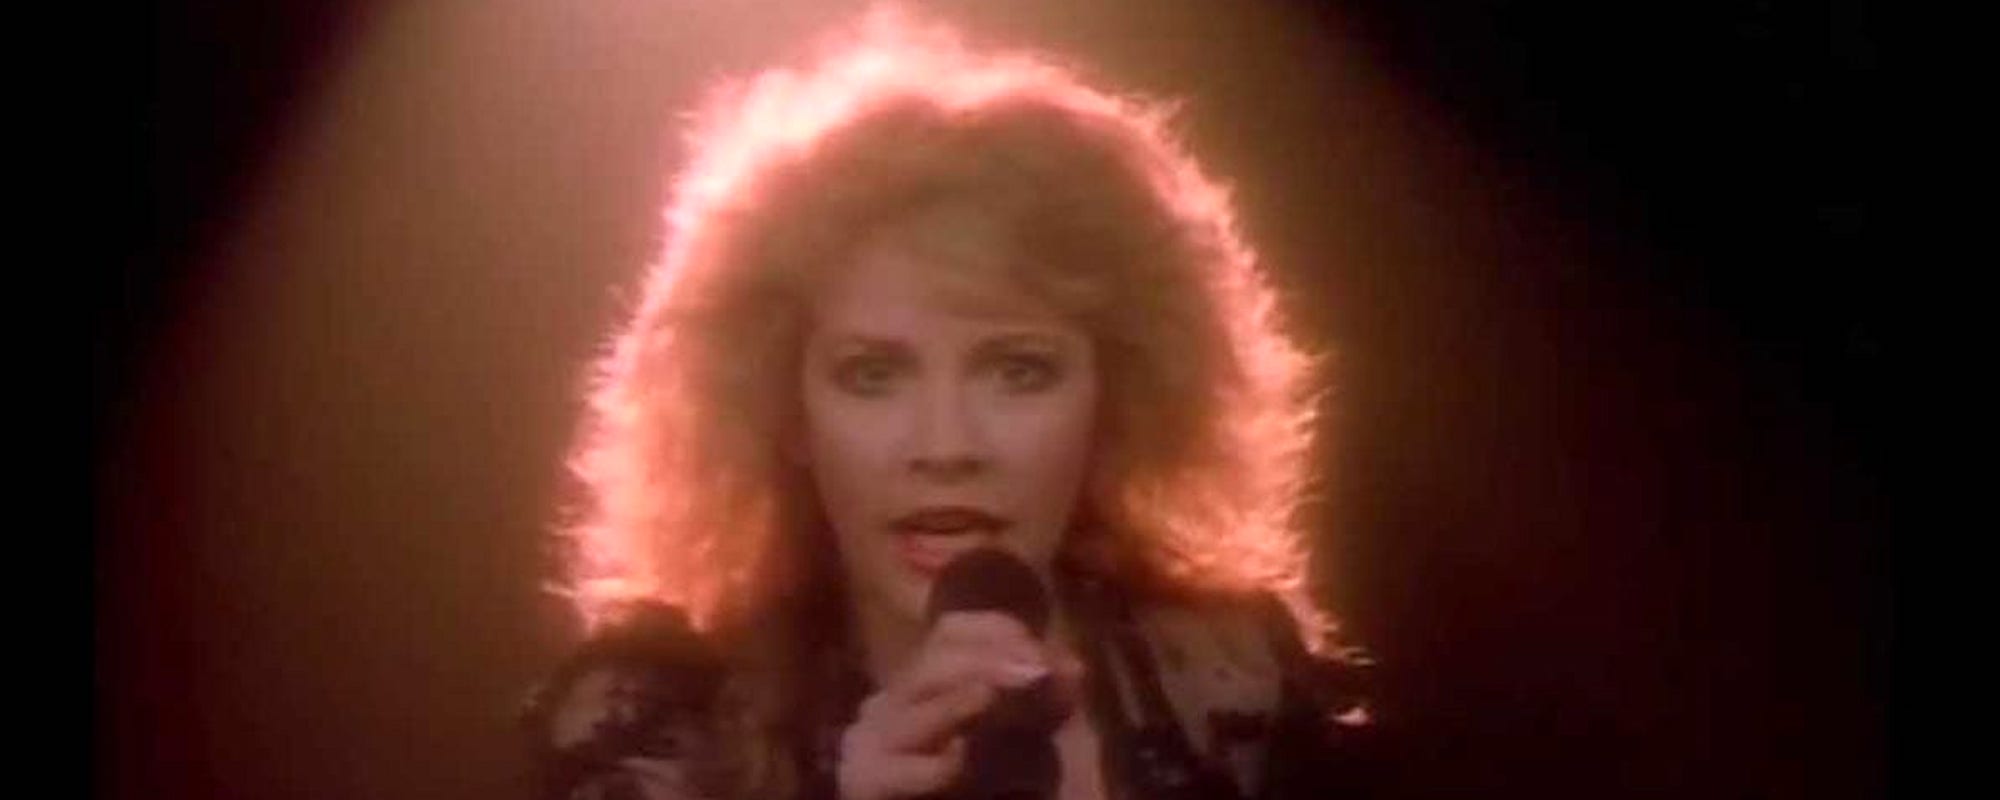 Behind the Song Lyrics: “Stand Back” by Stevie Nicks